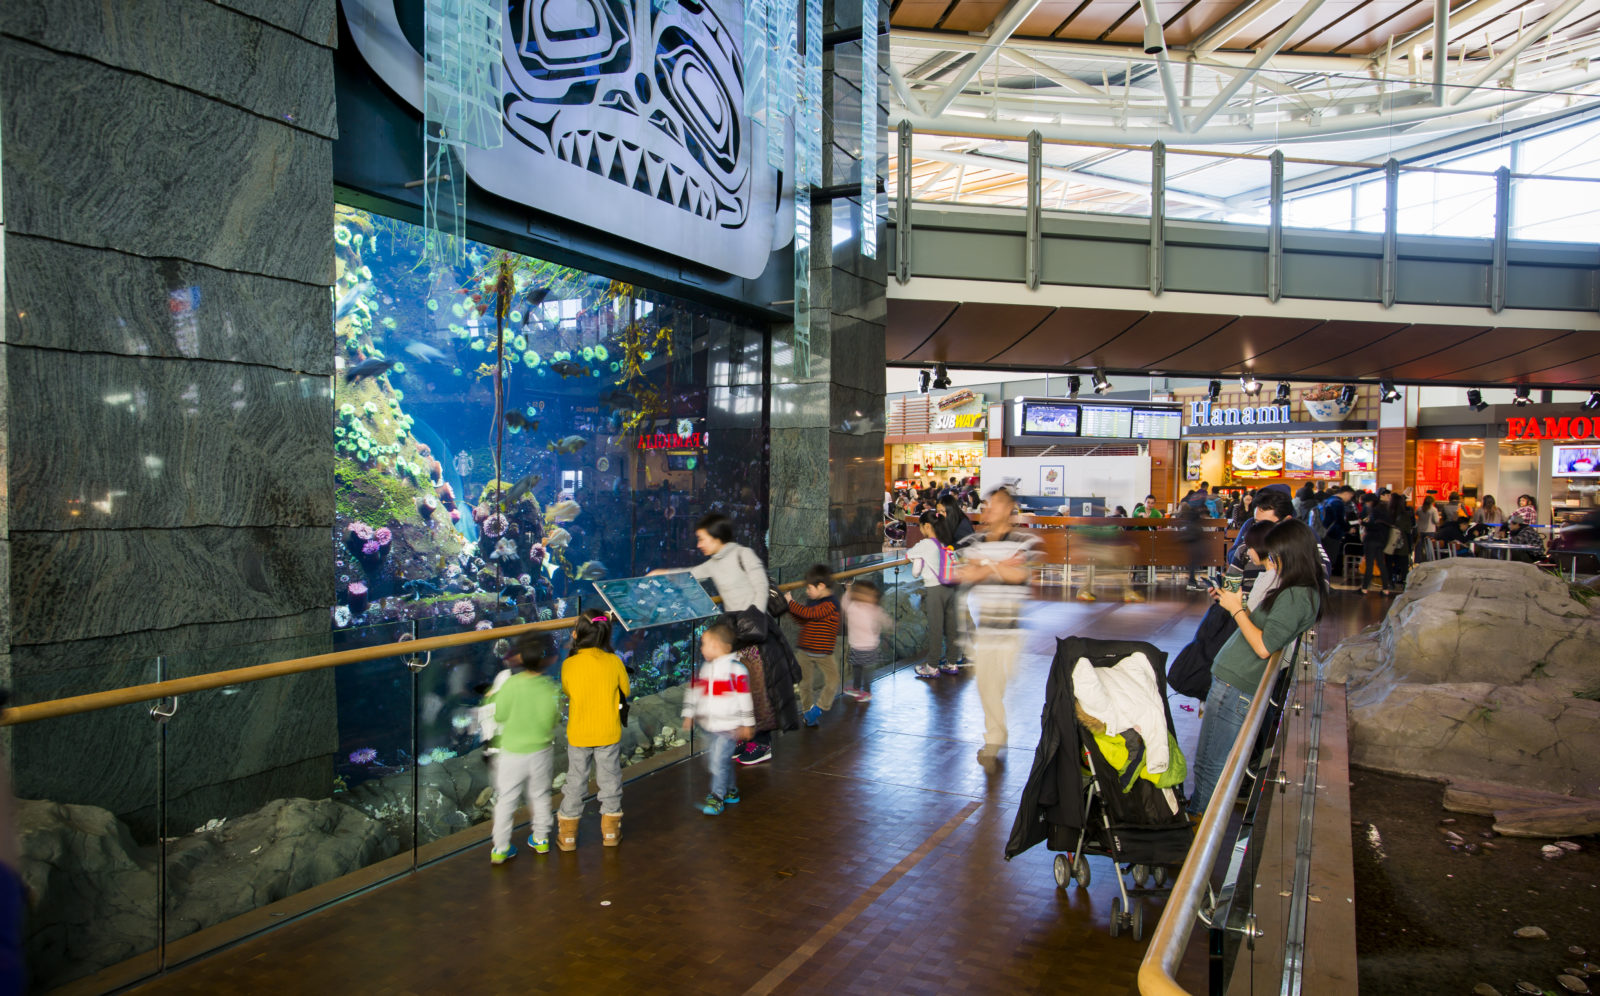 Vancouver International Airport is attractive to visitors who do not have the need to fly, because in addition to its basic function, it is also a place to display a number of sculpture collections and aquarium exhibitions.